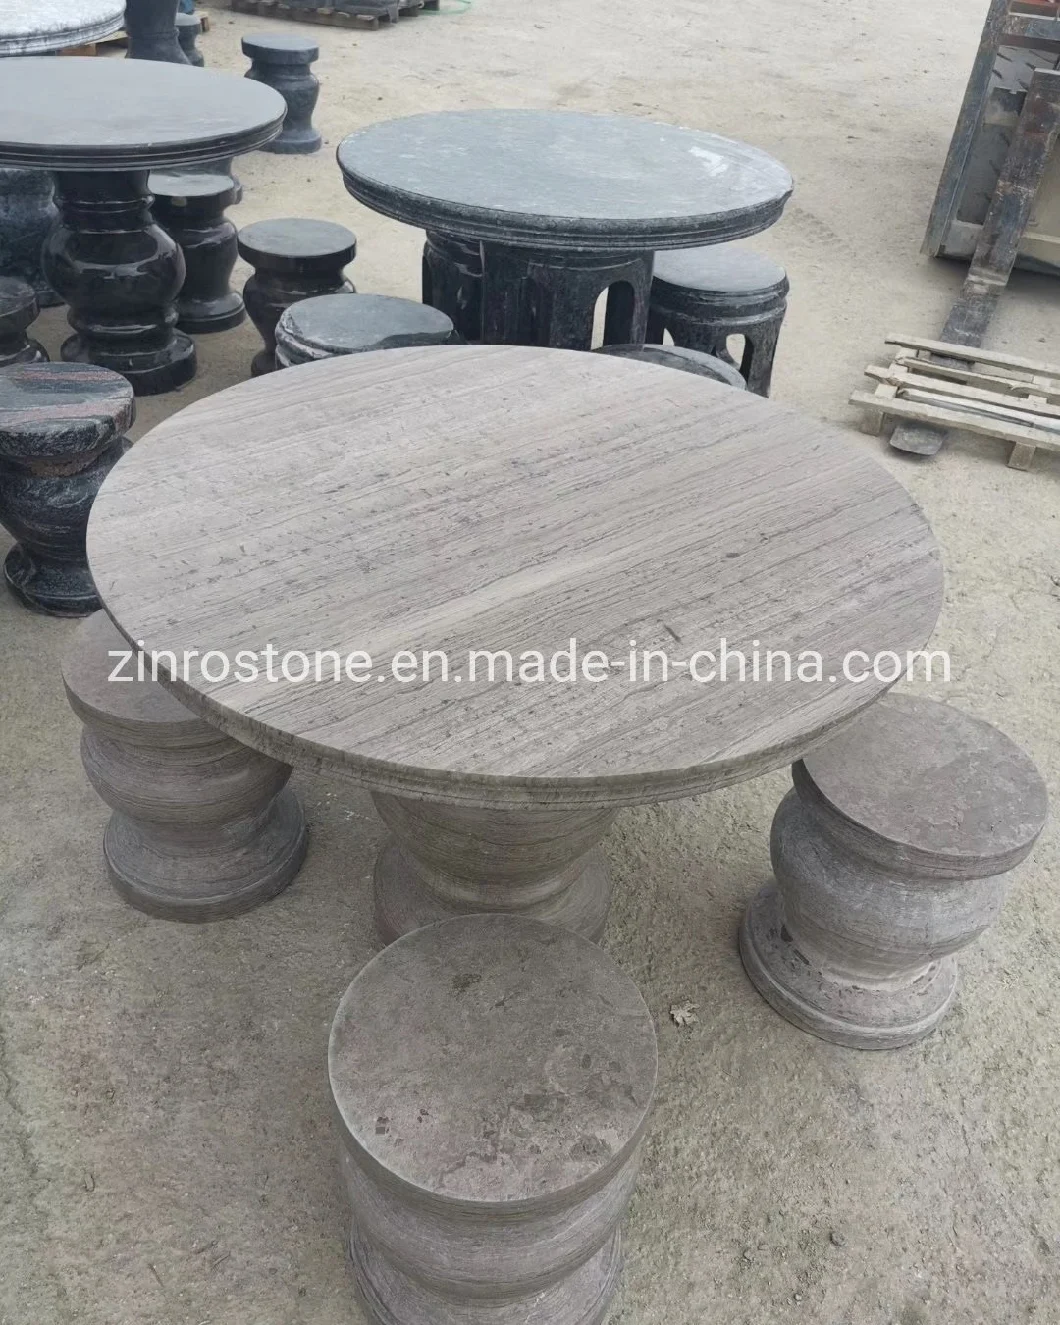 Natural Granite/Marble Stone Home/Hotel Decoration Coffee Dining Table